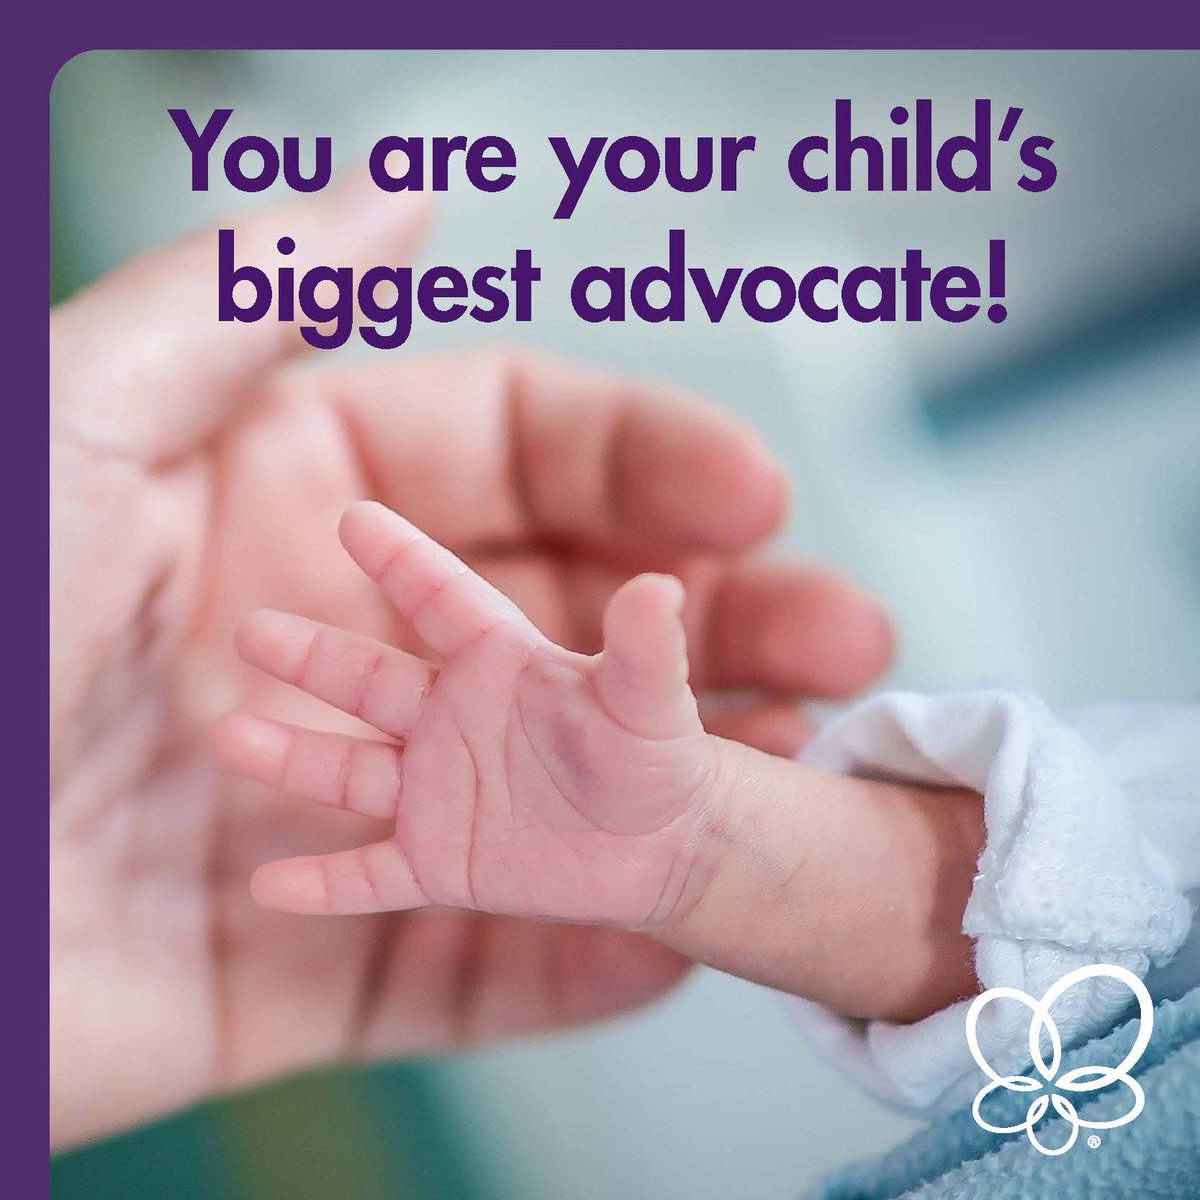 As a parent, you want the best for your baby during their NICU stay. Learn how you can help your very tiny baby thrive with @Preemieworld’s free educational fact sheet. hubs.li/Q024jbTM0  #EHMD #humanmilk